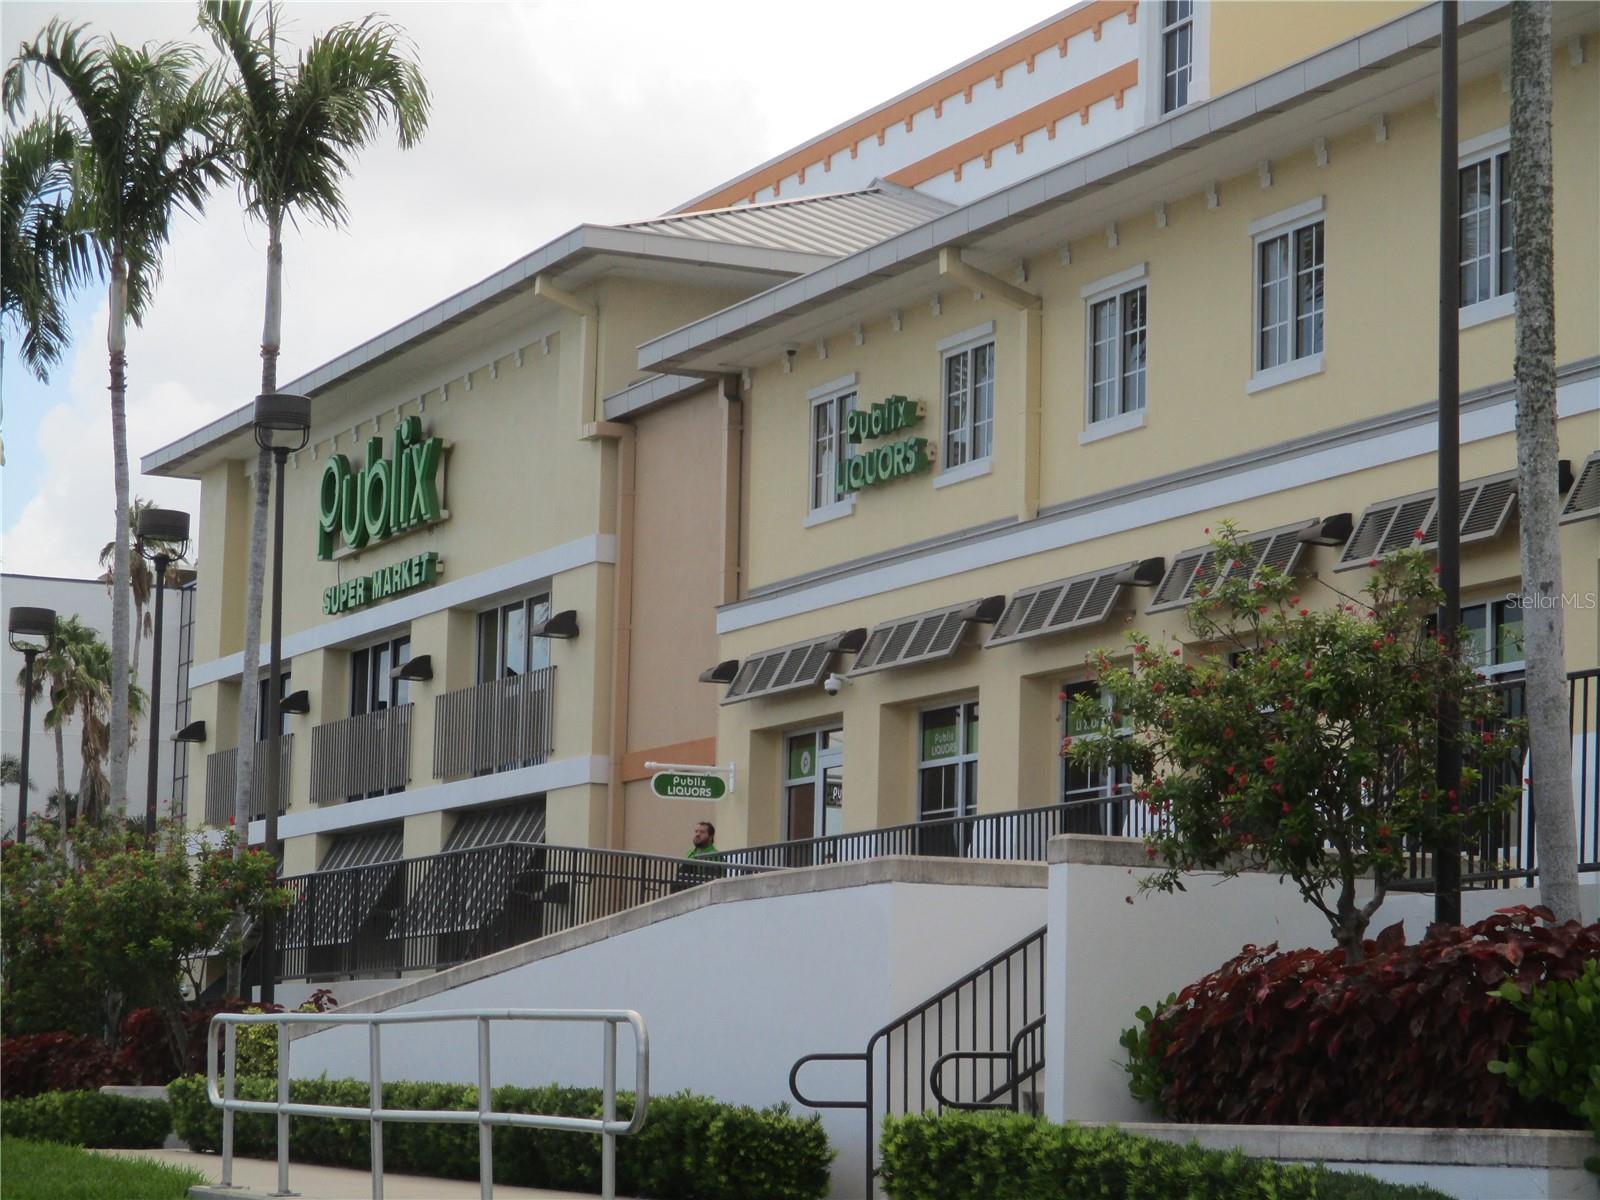 Publix supermarket is next door. Proximity to Restaurants, beach, banks, and the GULF OF MEXICO.